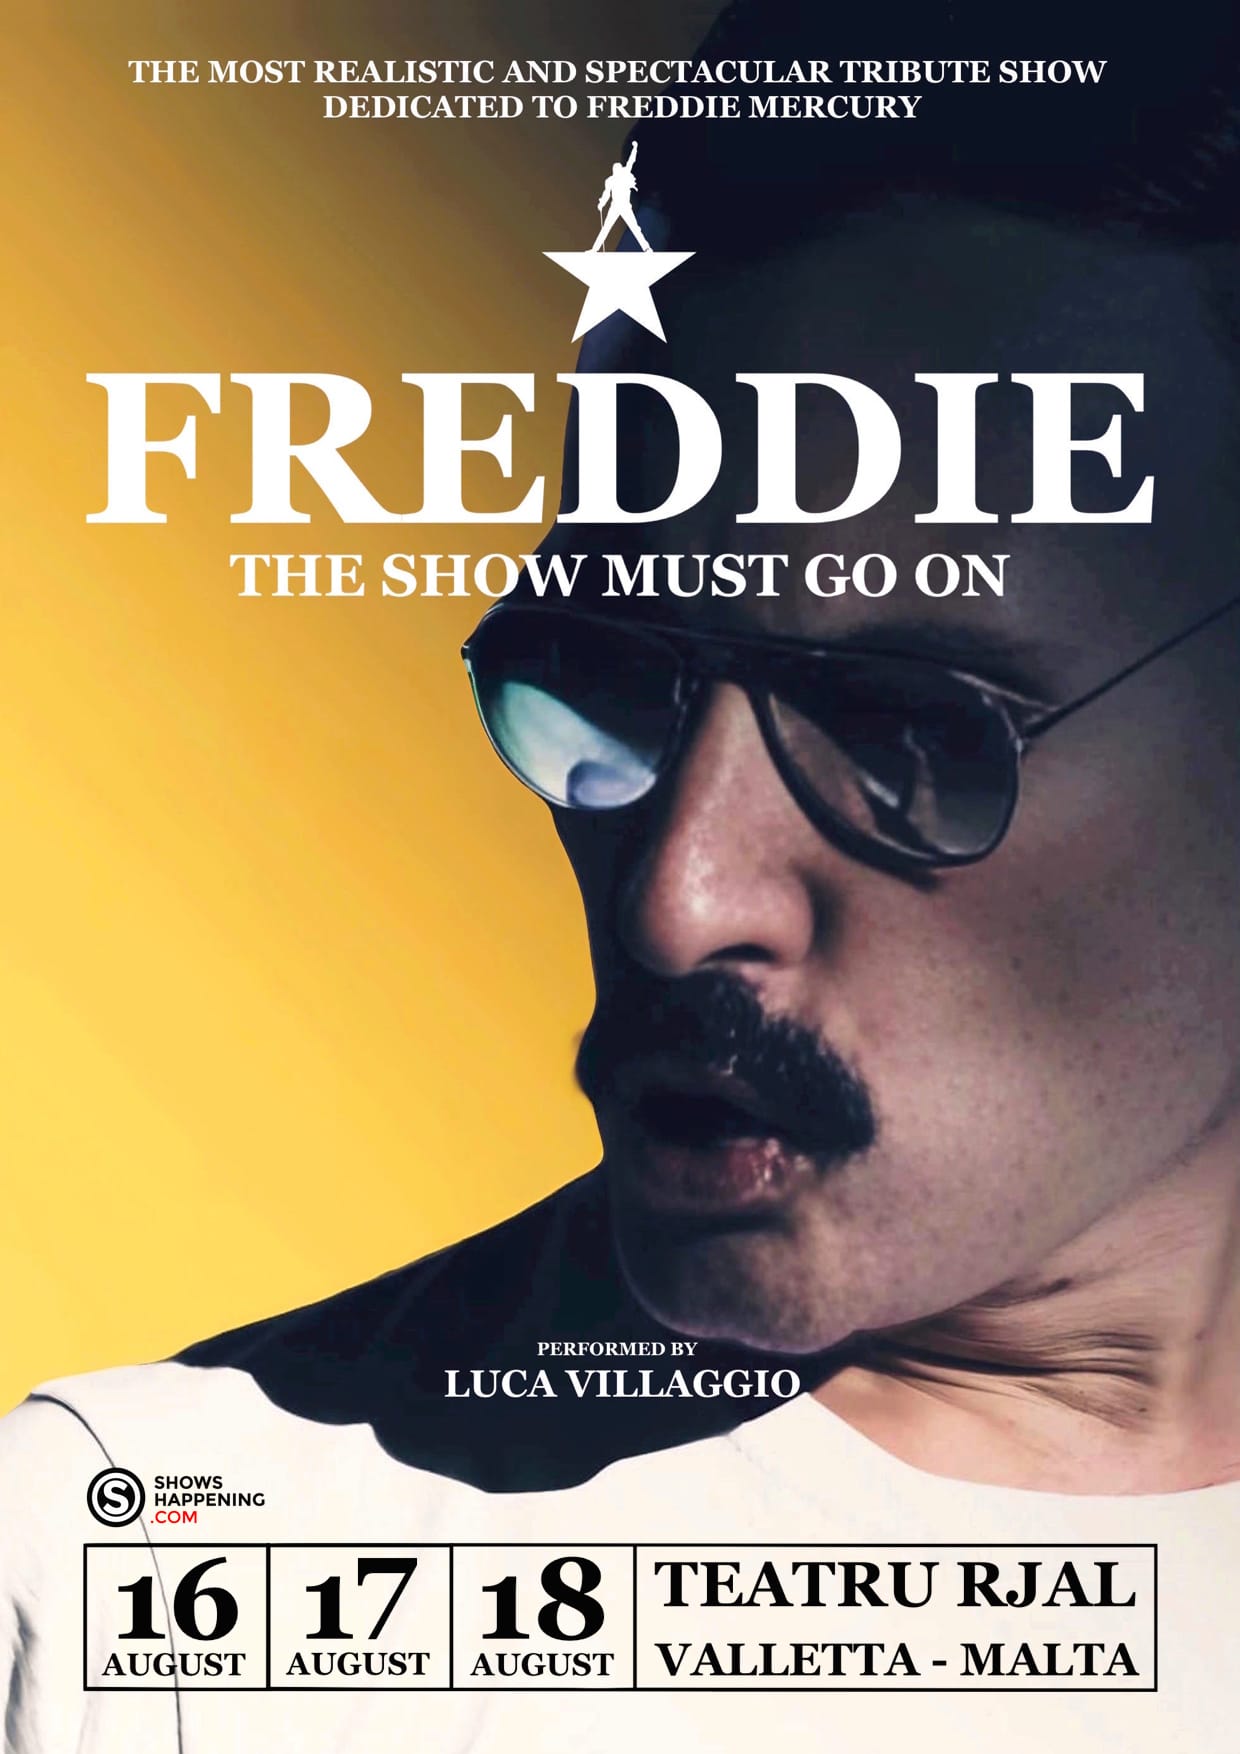 FREDDIE - THE SHOW MUST GO ON